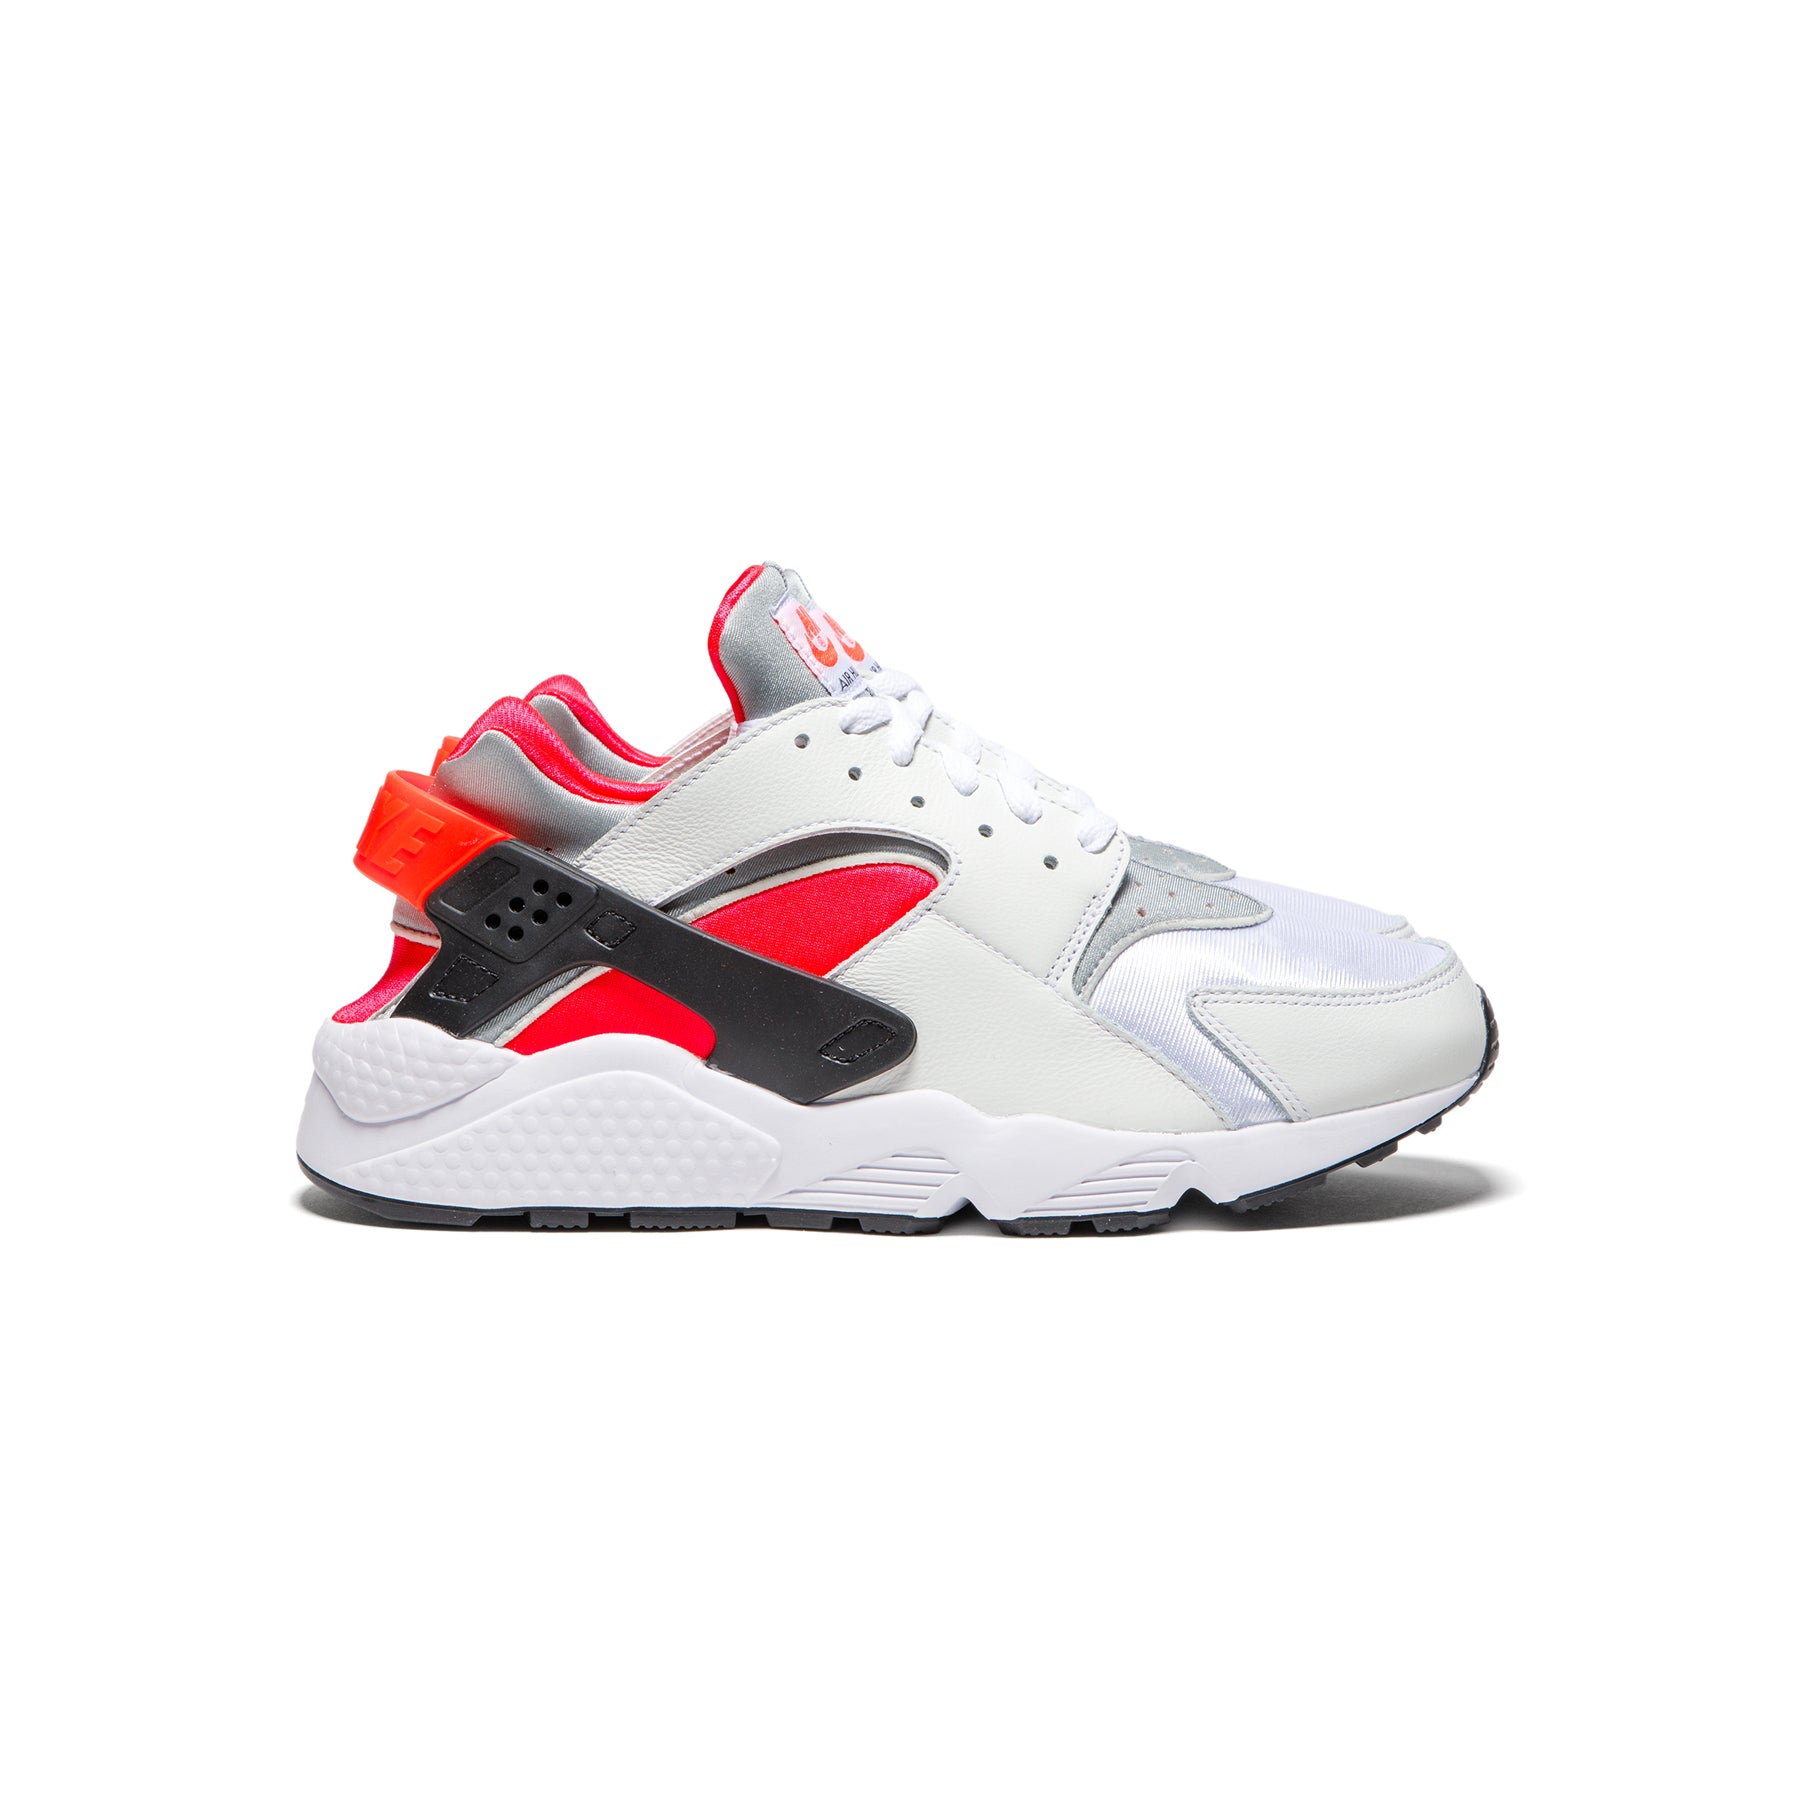 Air Huarache Sizing - these fit fine once I can get my foot into